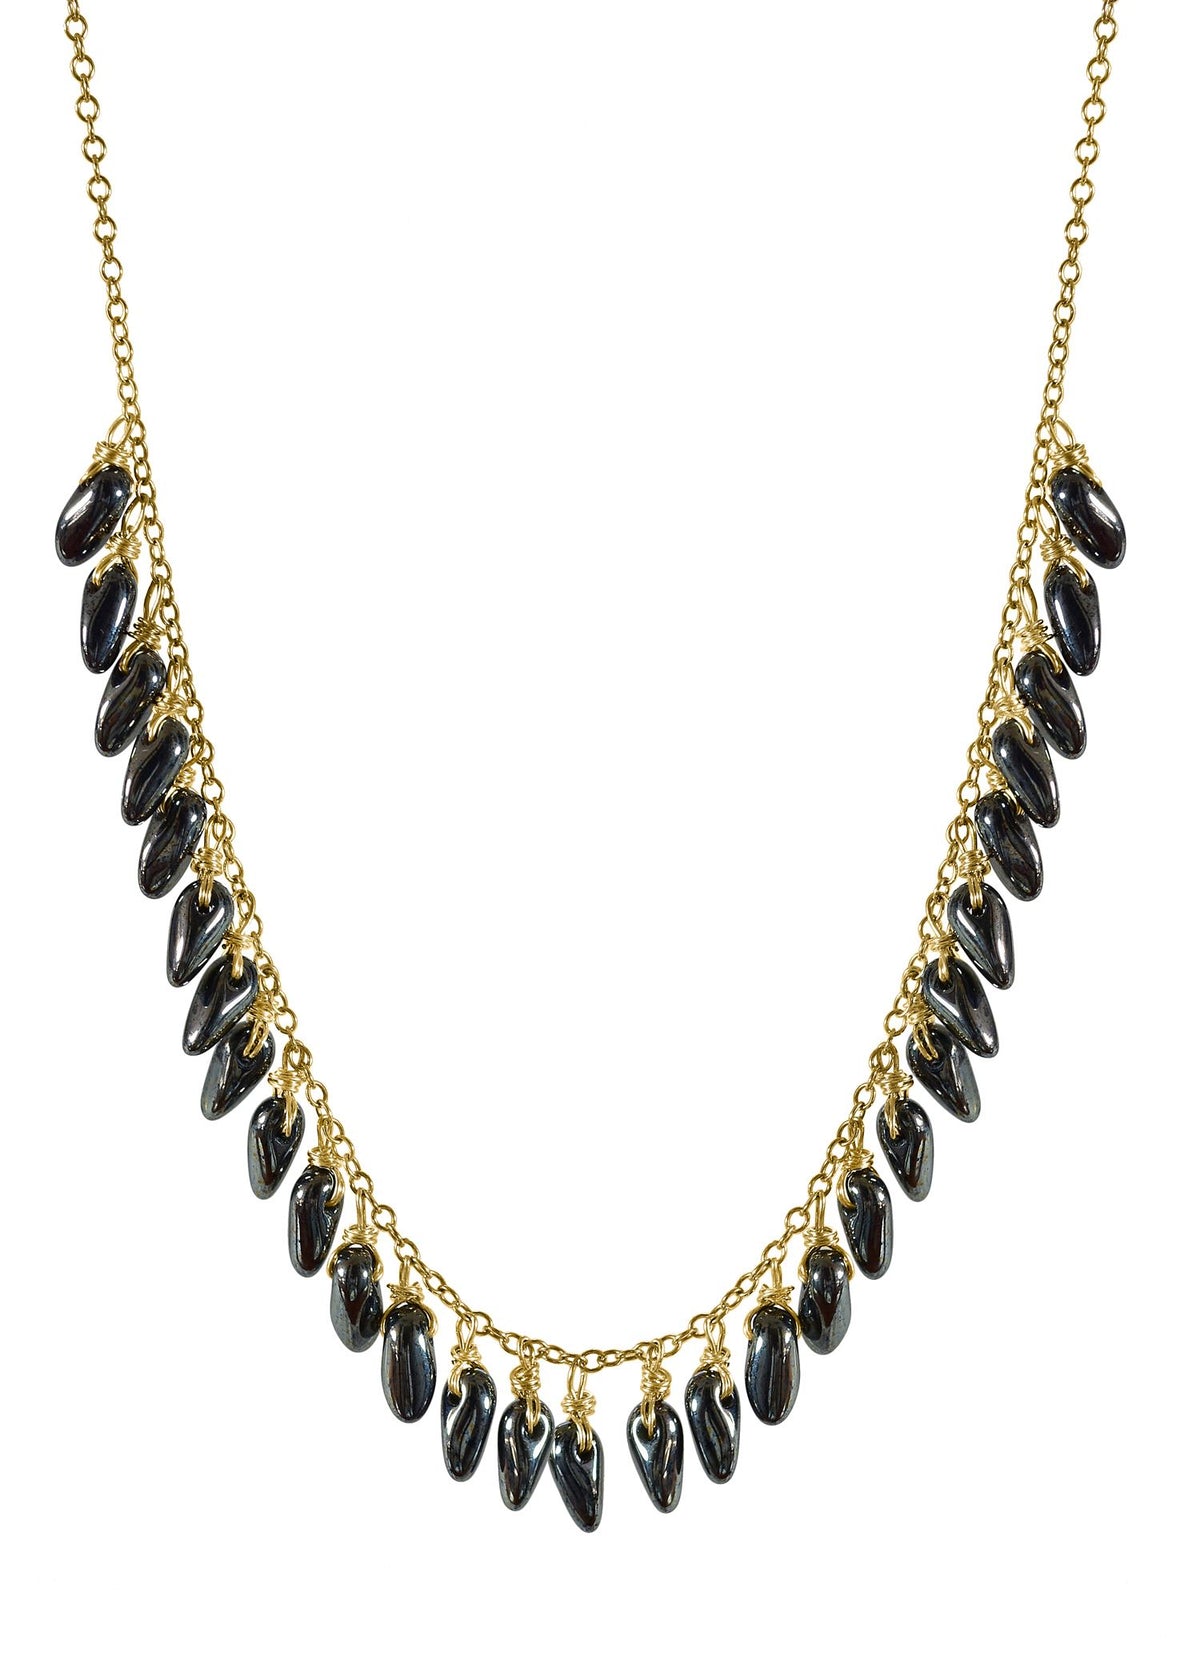 14k gold fill Hematite glass beads Necklace measures 18&quot; in length Pendants measure 3/16&quot; in length Handmade in our Los Angeles studio